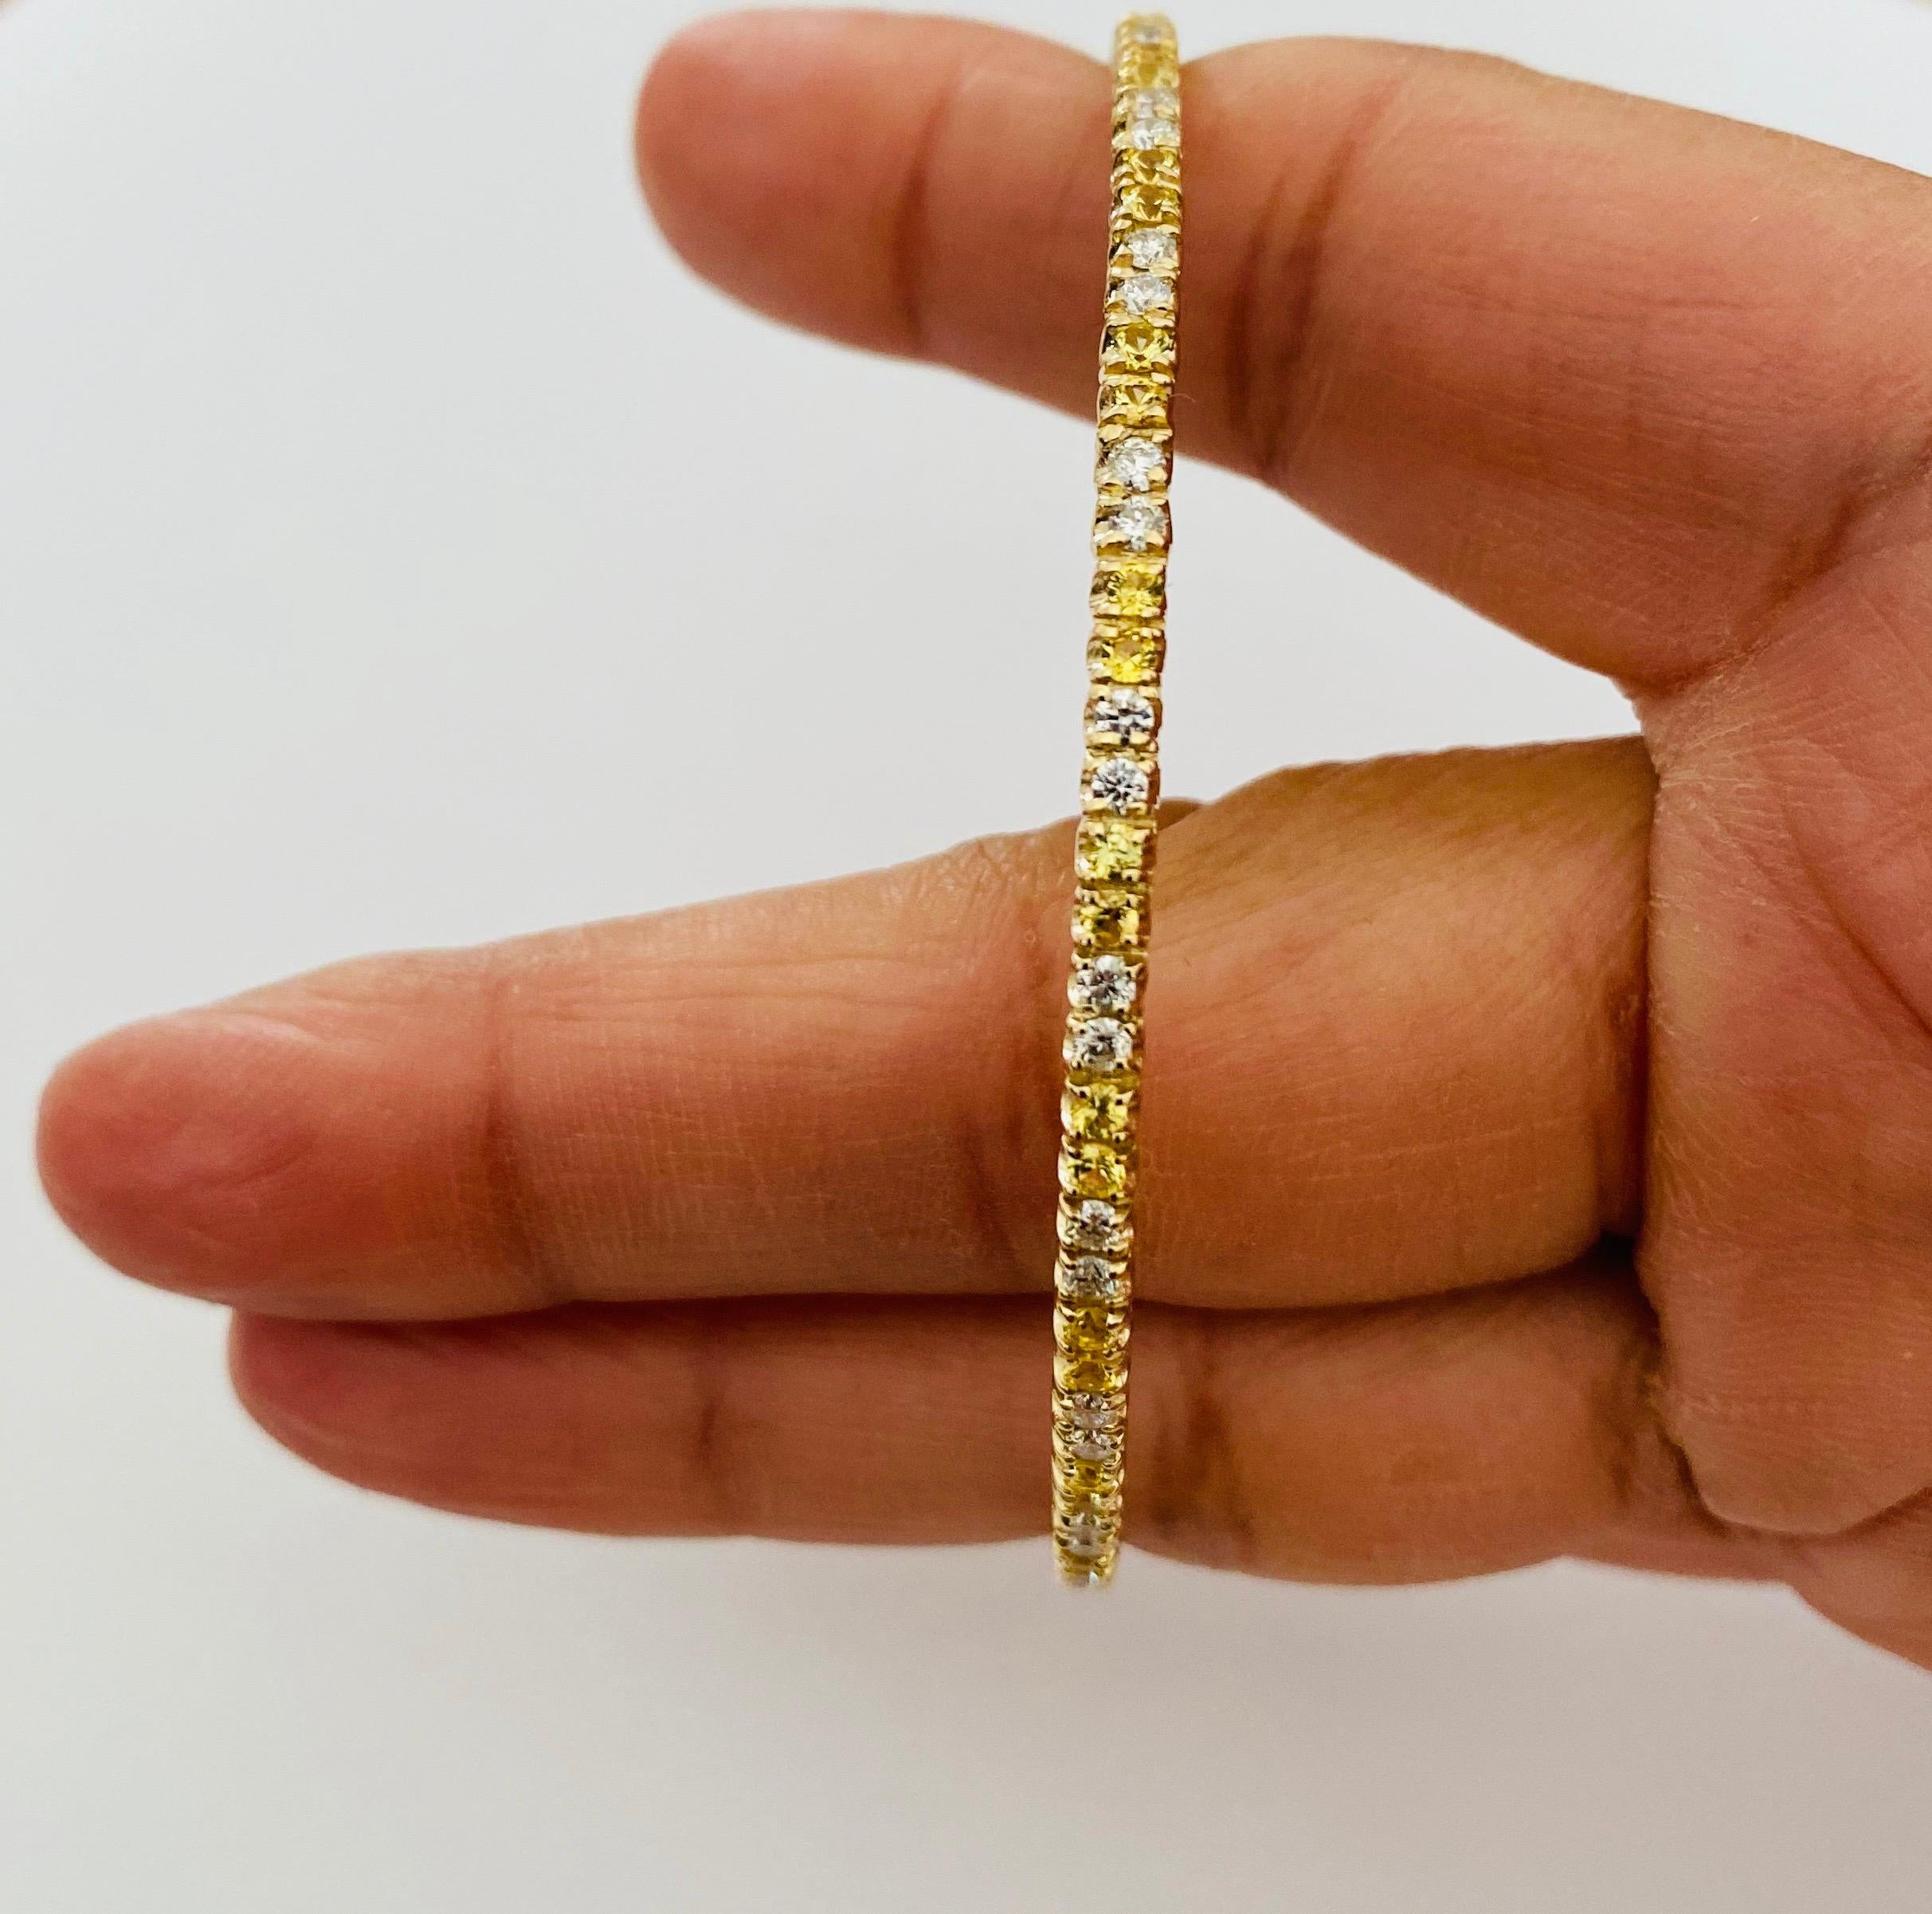 2.71 Carat Yellow Sapphire Diamond 14 Karat Yellow Gold Eternity Bangle In New Condition For Sale In Los Angeles, CA